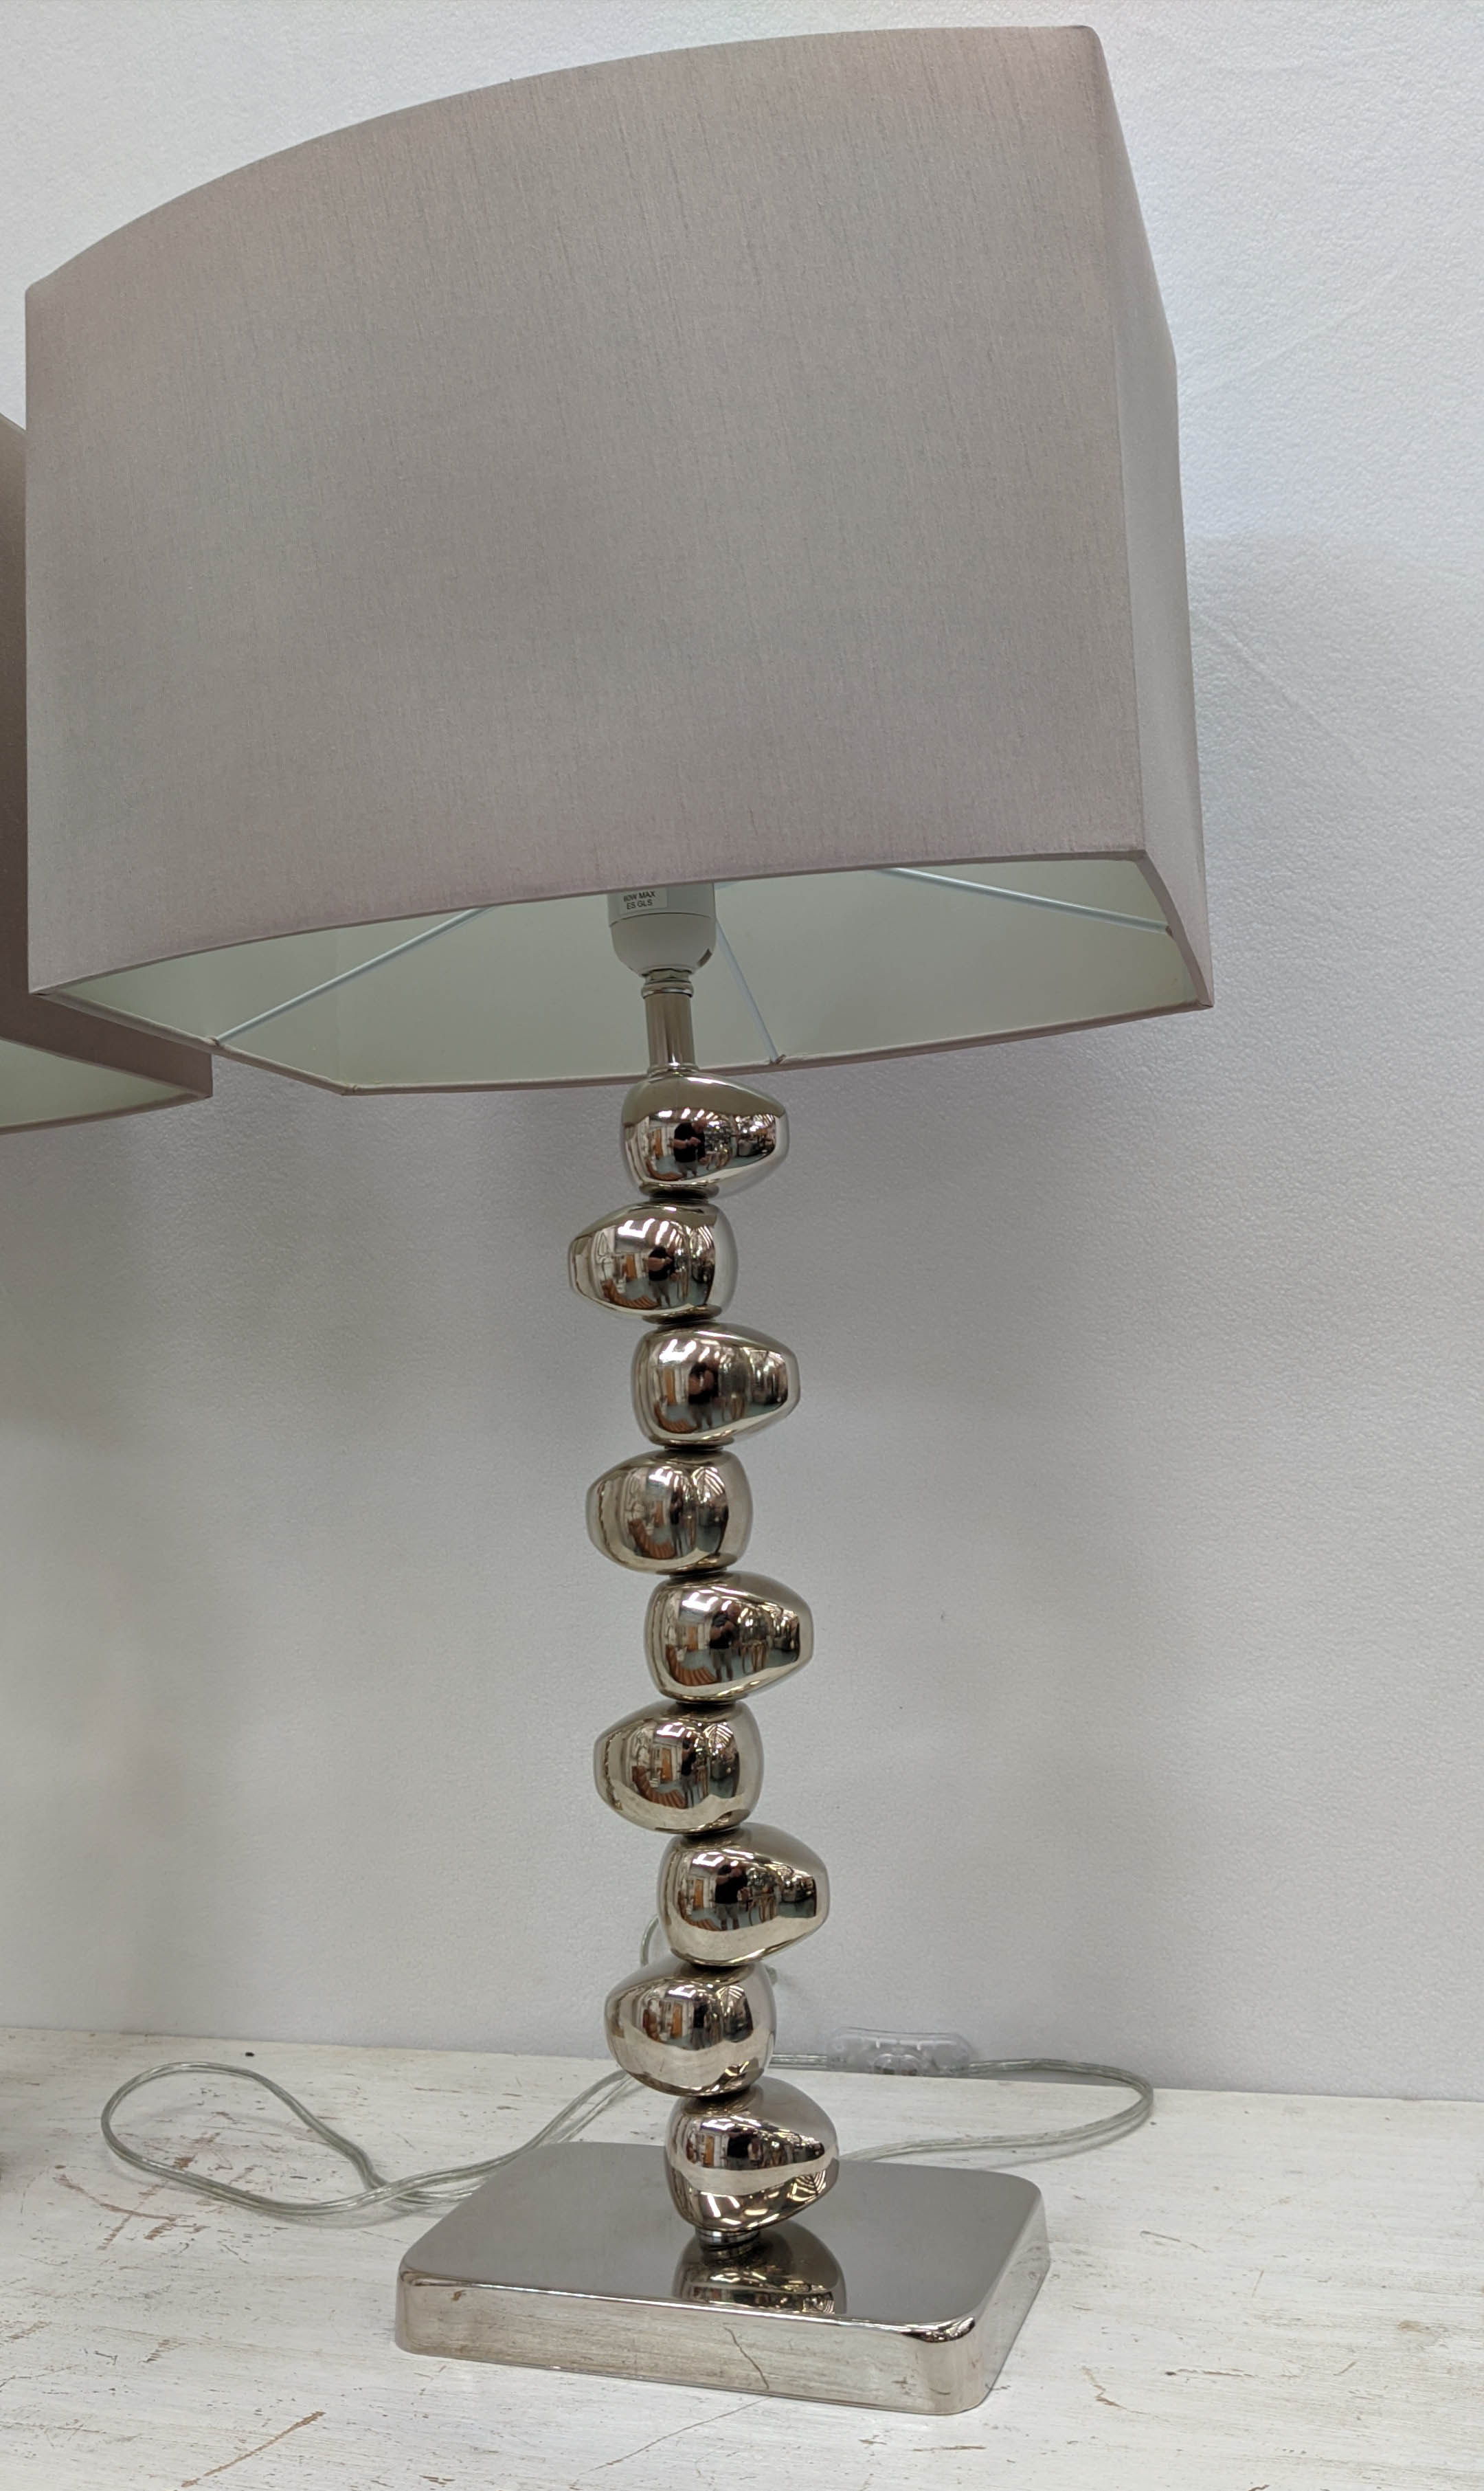 TABLE LAMPS, a pair, 70cm H including shades polished metal pebble design. (2) - Image 3 of 6